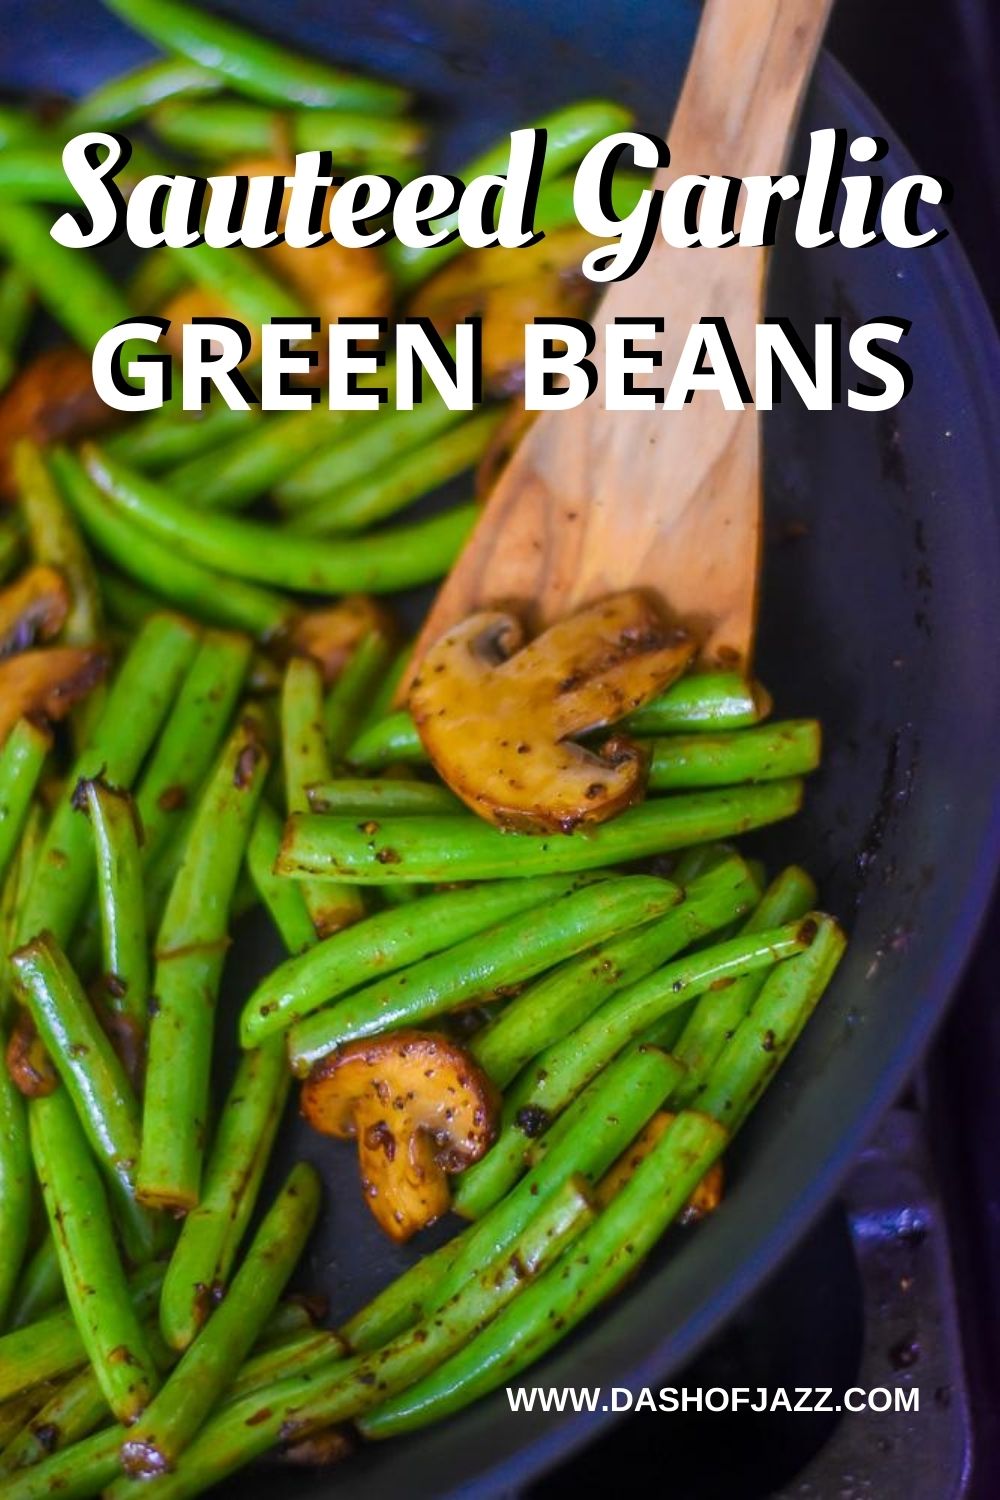 decorative image of green beans for pinterest